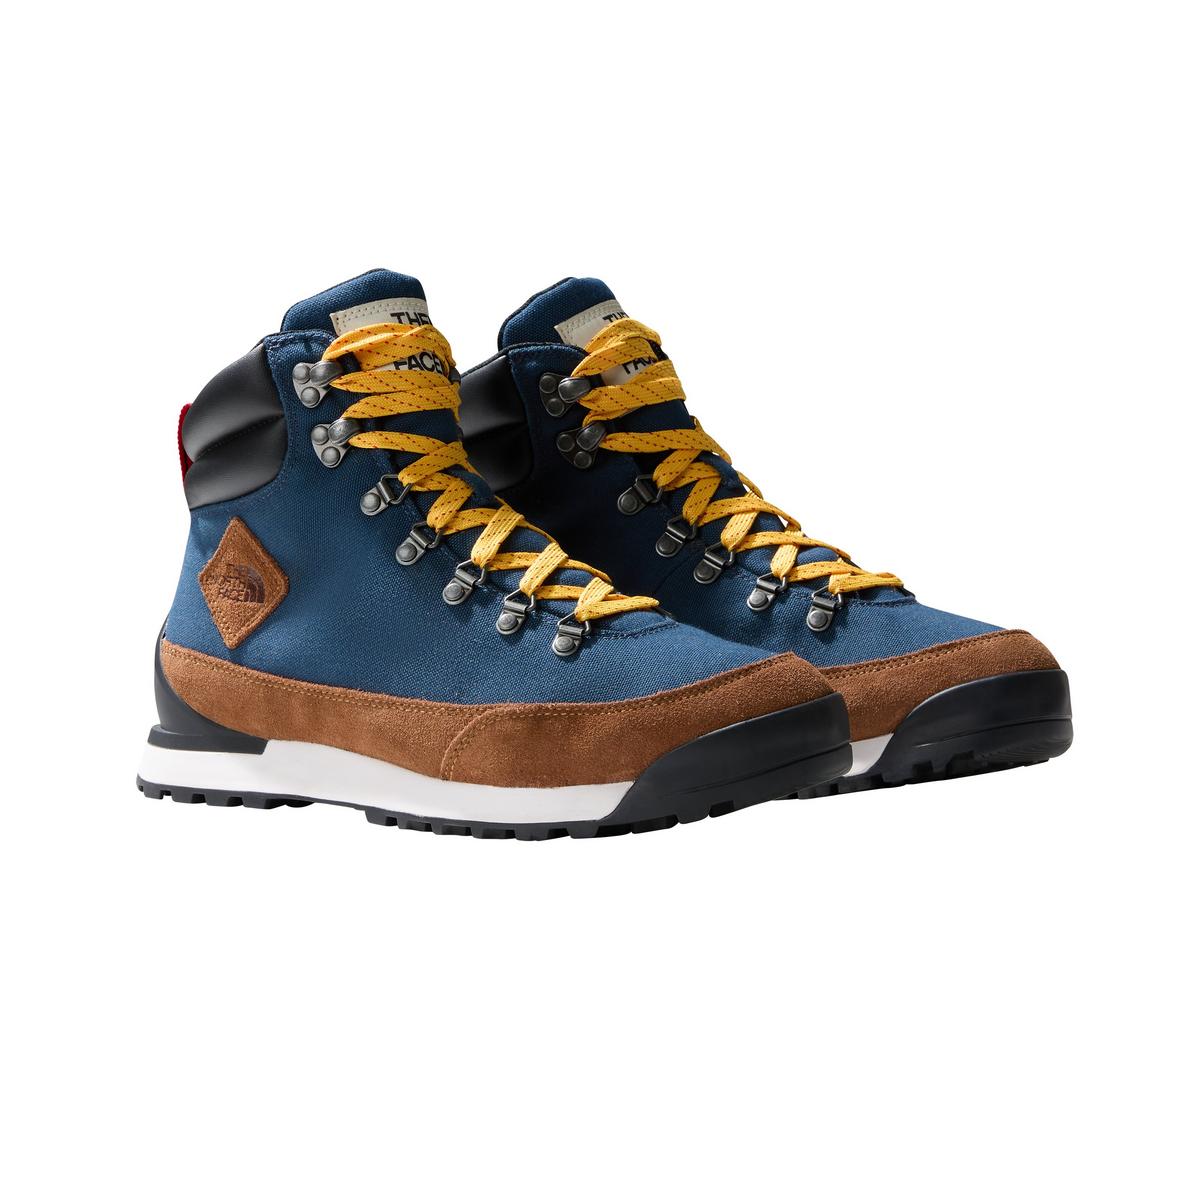 The North Face Men's Back to Berkeley Waterproof Lifestyle Boots - Blue